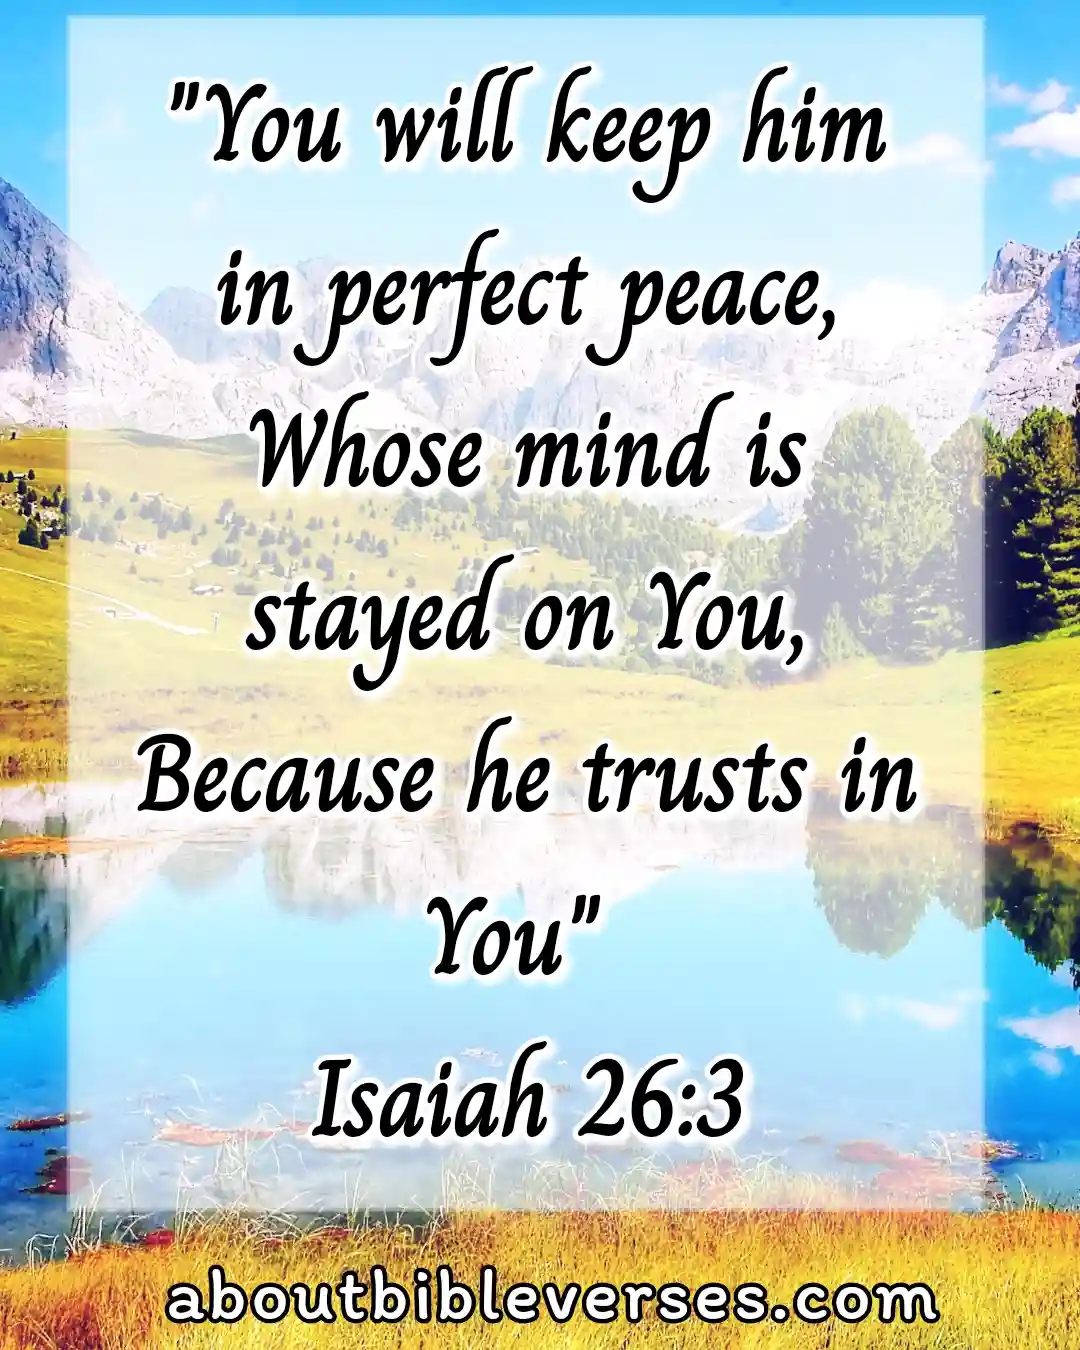 Bible Verses About Staying Calm And Trusting God (Isaiah 26:3)